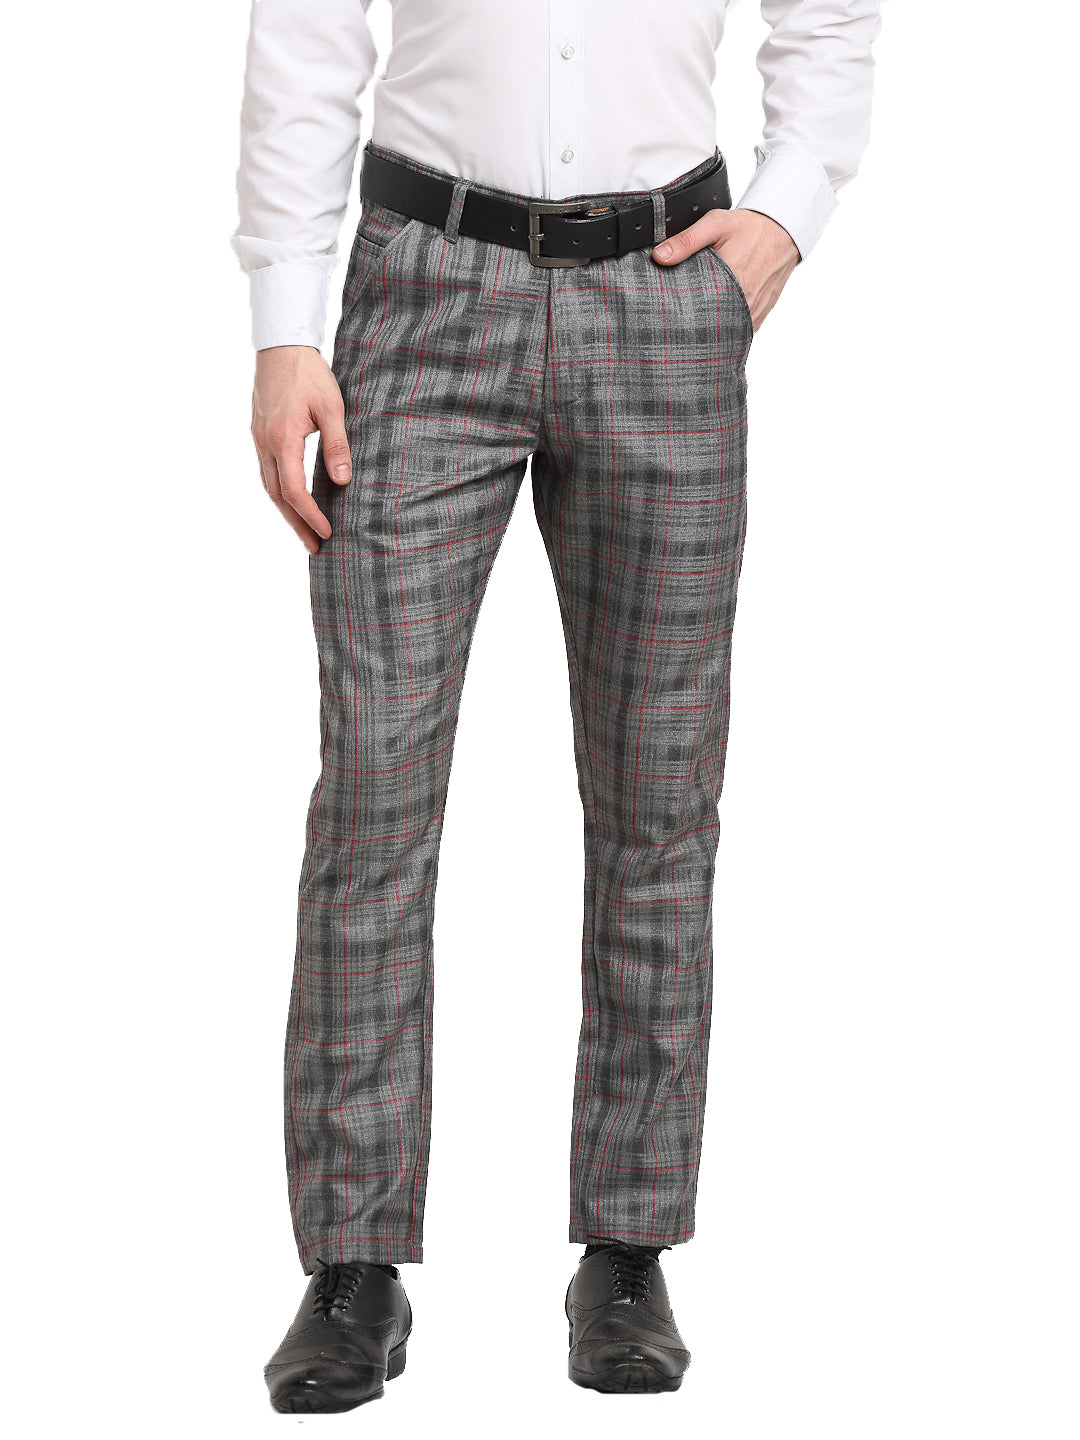 Italian Slim Fit Blue Check Trousers | Buy Online at Moss